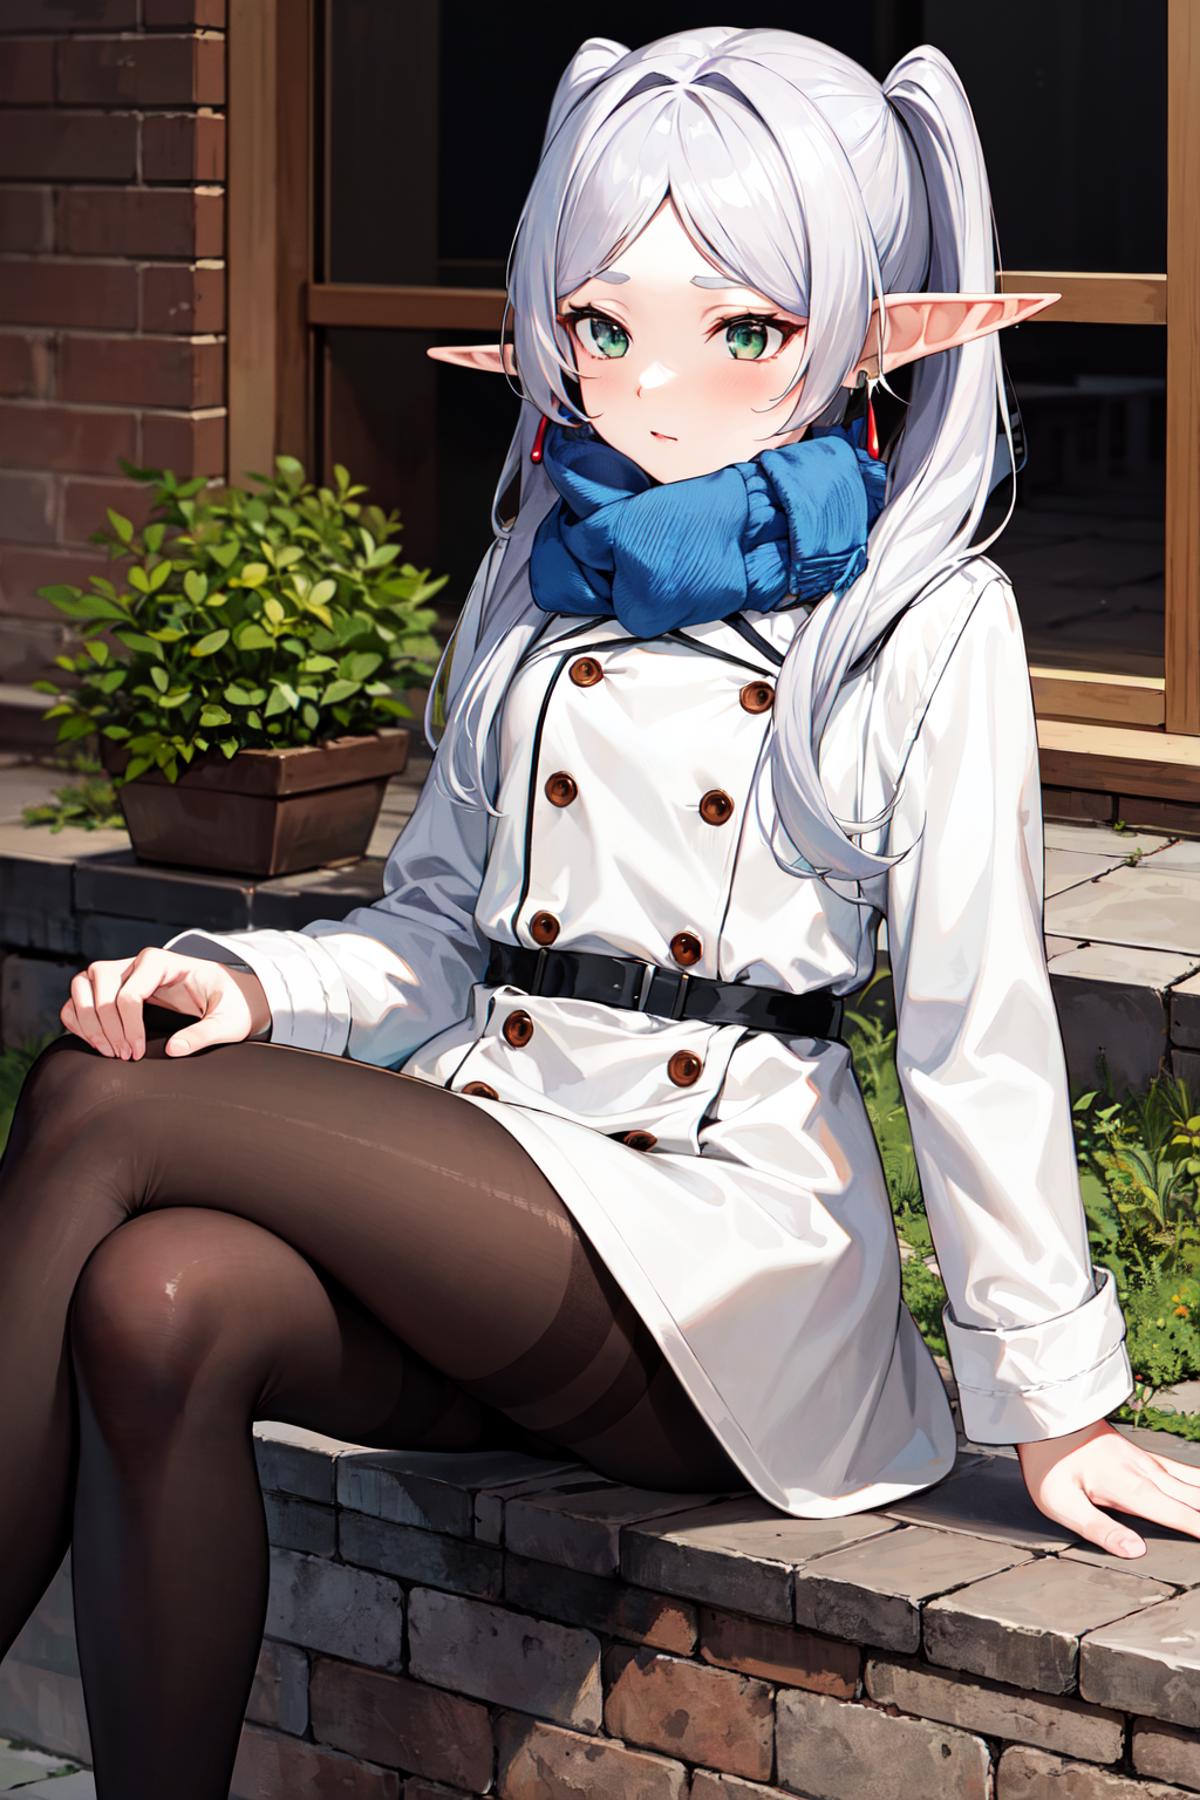 Anime-style elf girl wearing a white coat, black belt, and blue scarf.